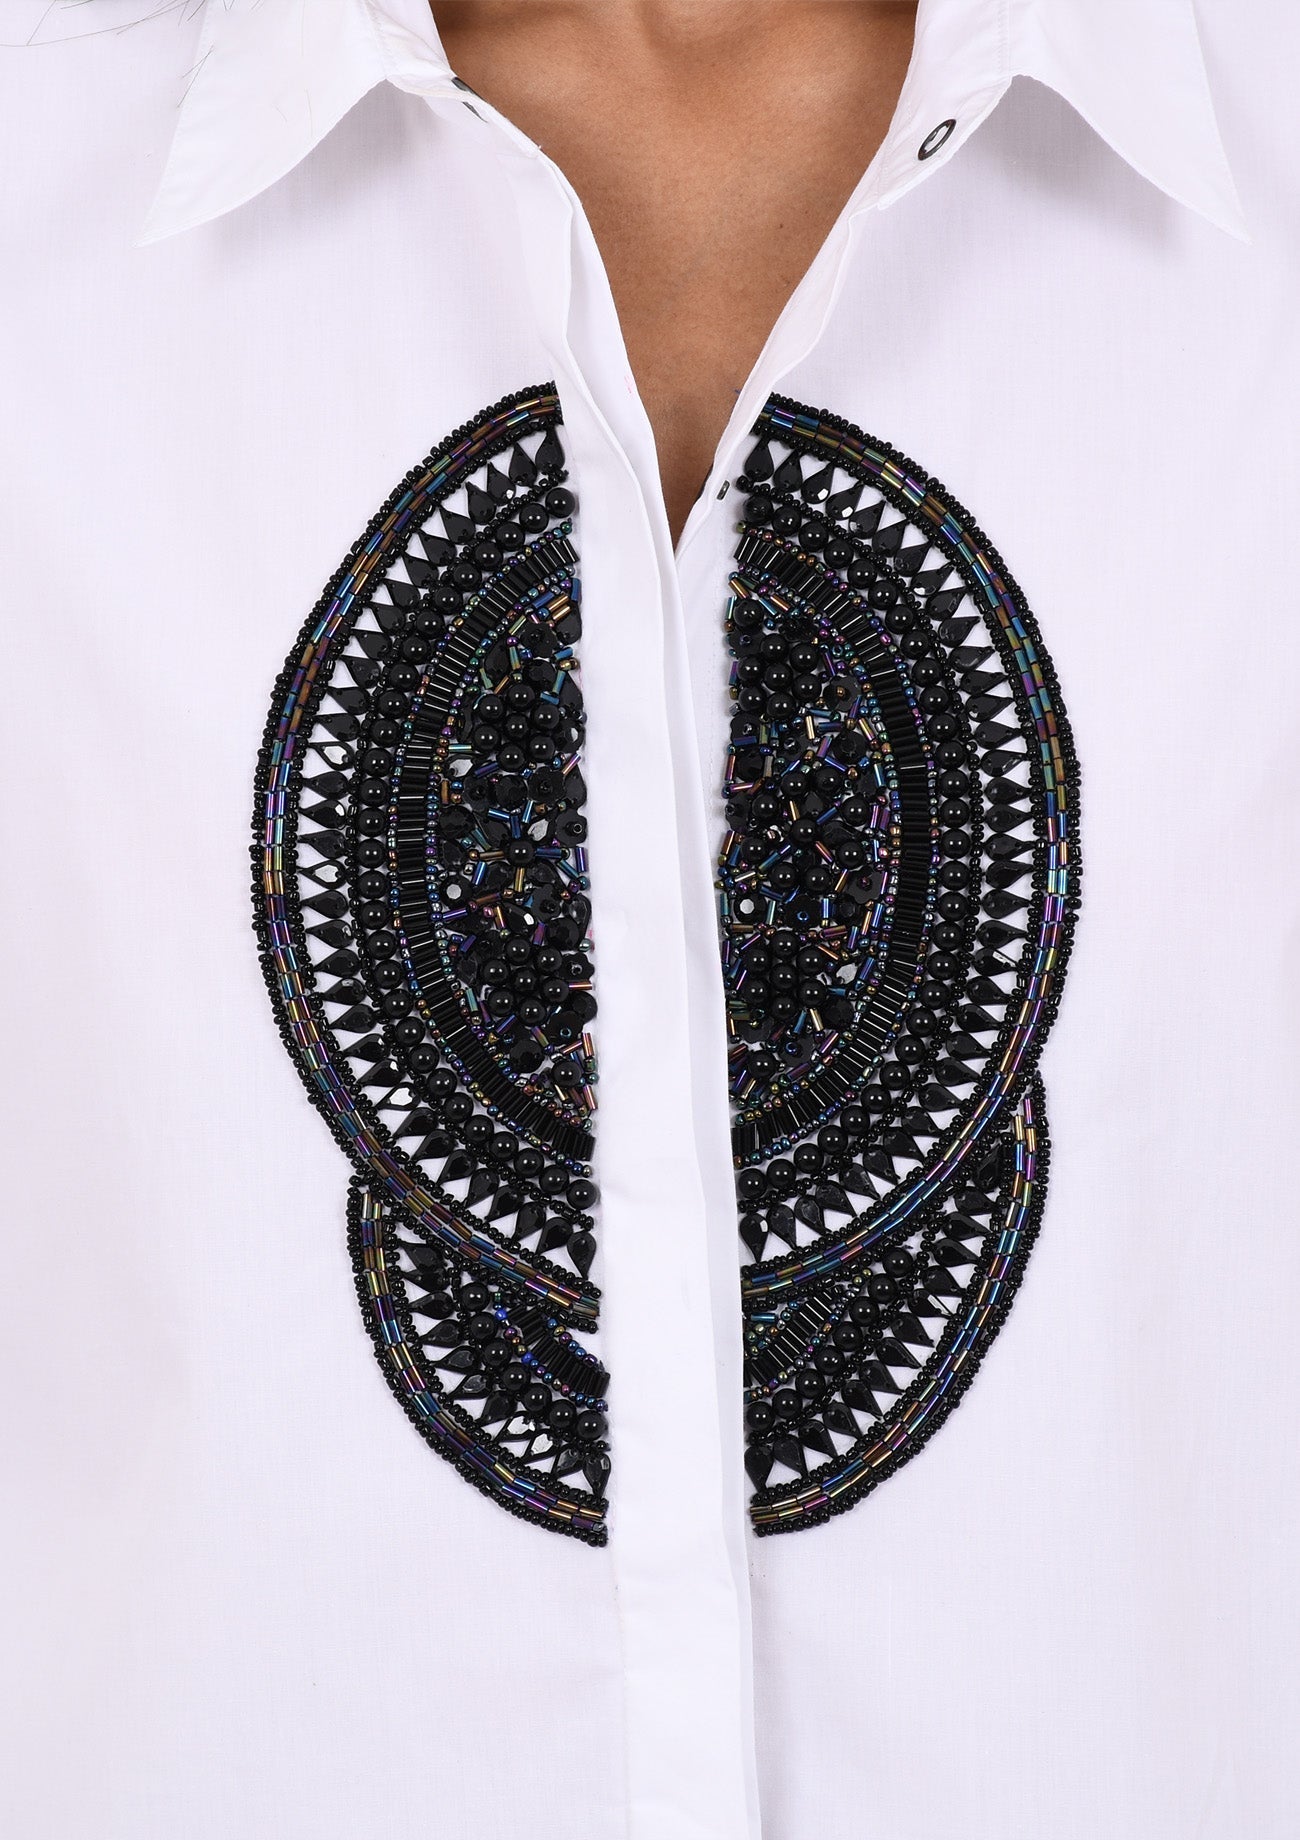 White Cotton Shirt With Black Embroidery